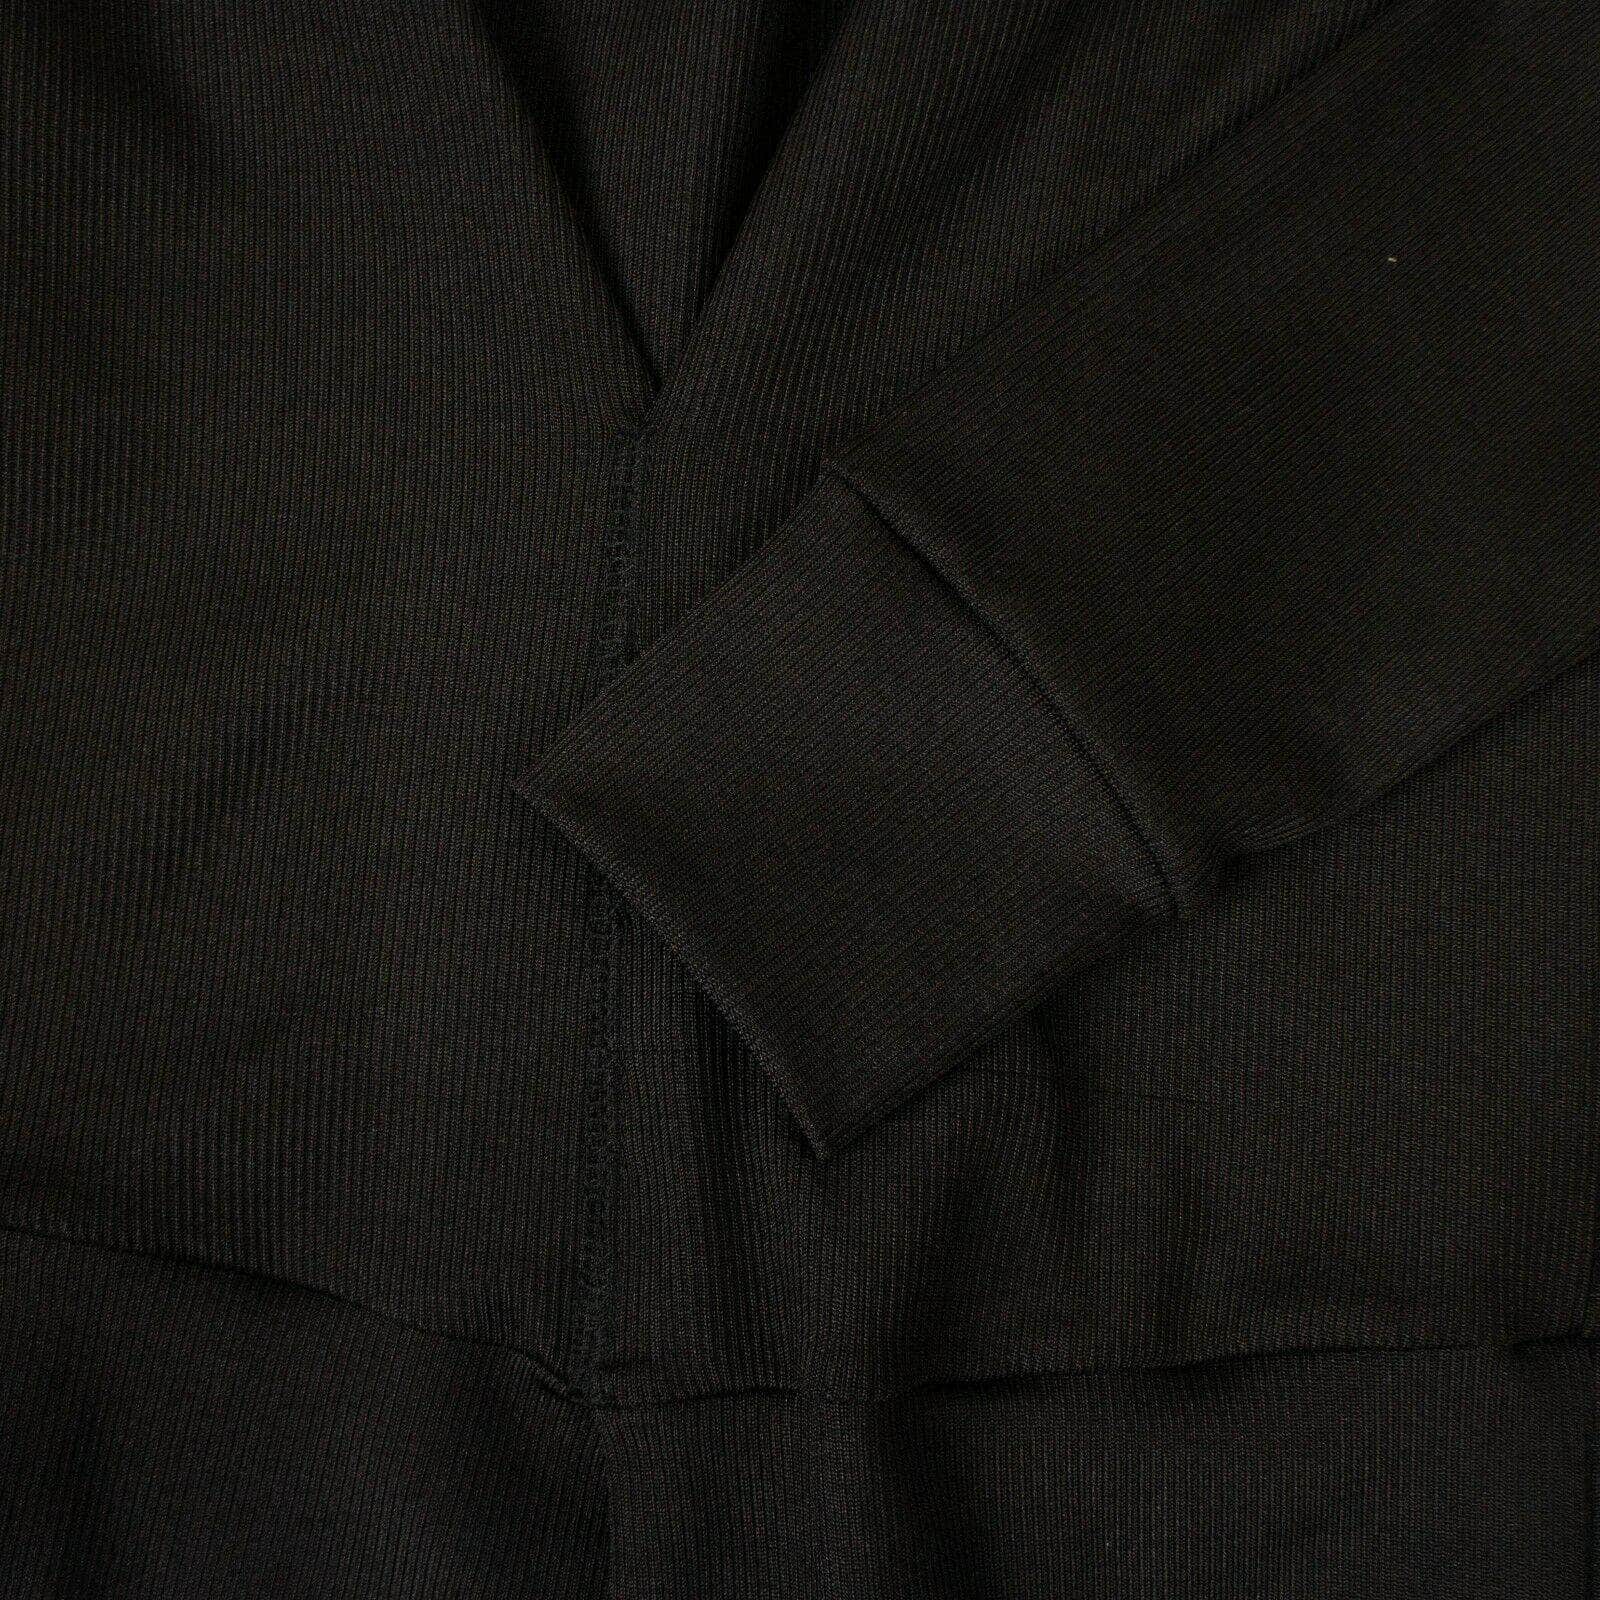 UNRAVEL PROJECT channelenable-all, couponcollection, gender-womens, main-clothing, sale-enable, size-s, size-xxs, under-250, unravel-project XXS Black Ruched Hole Detail Top 82NGG-UN-1055/XXS 82NGG-UN-1055/XXS